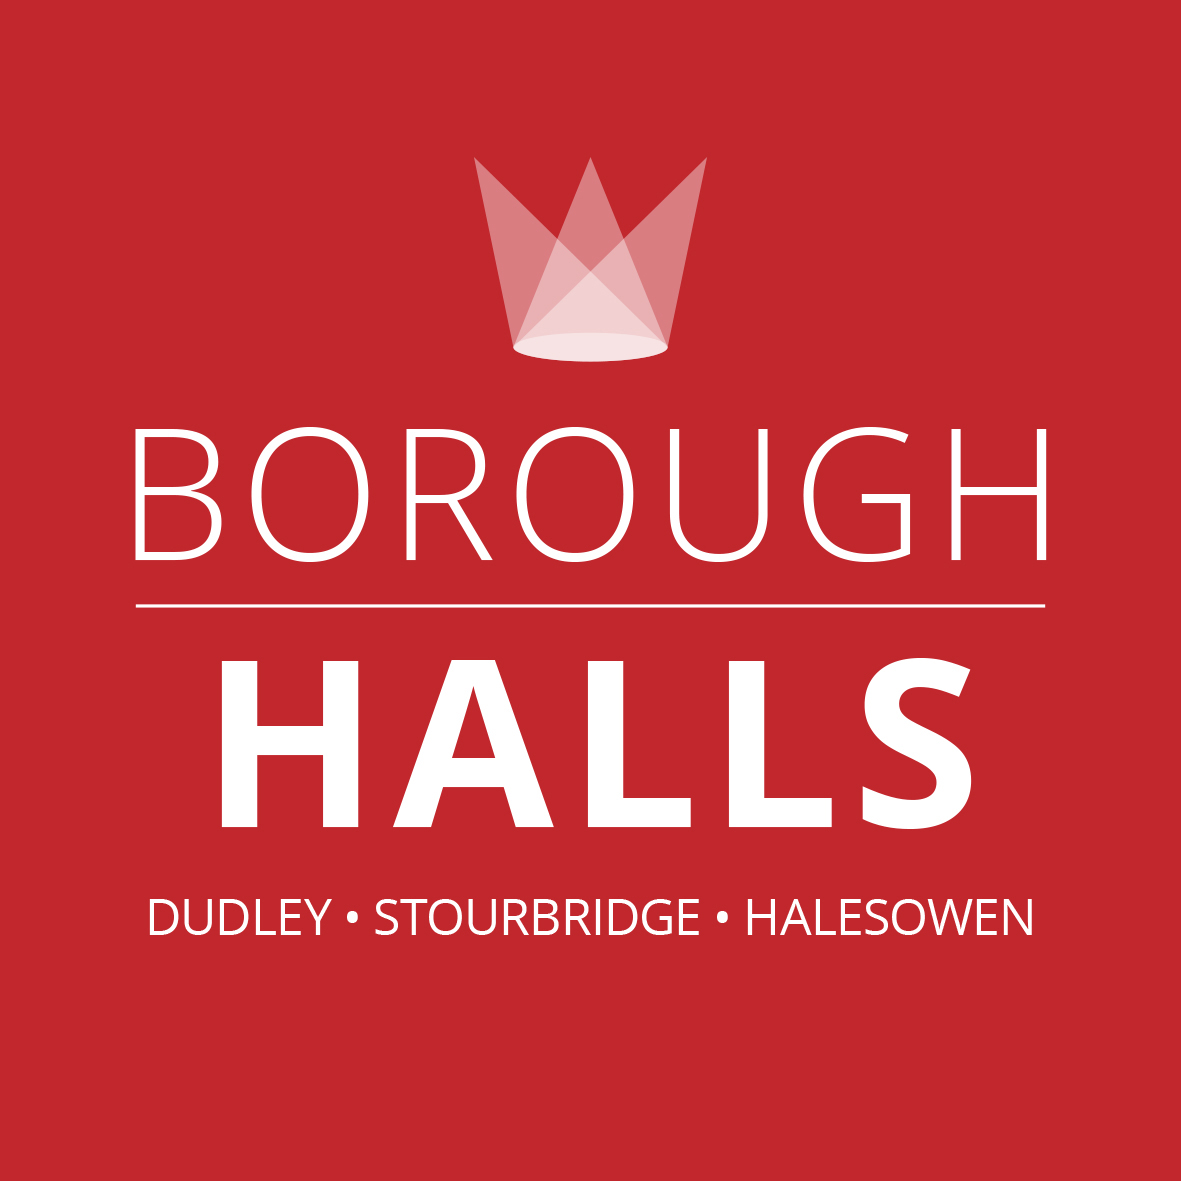 Dudley Town Hall - Halls for Hire